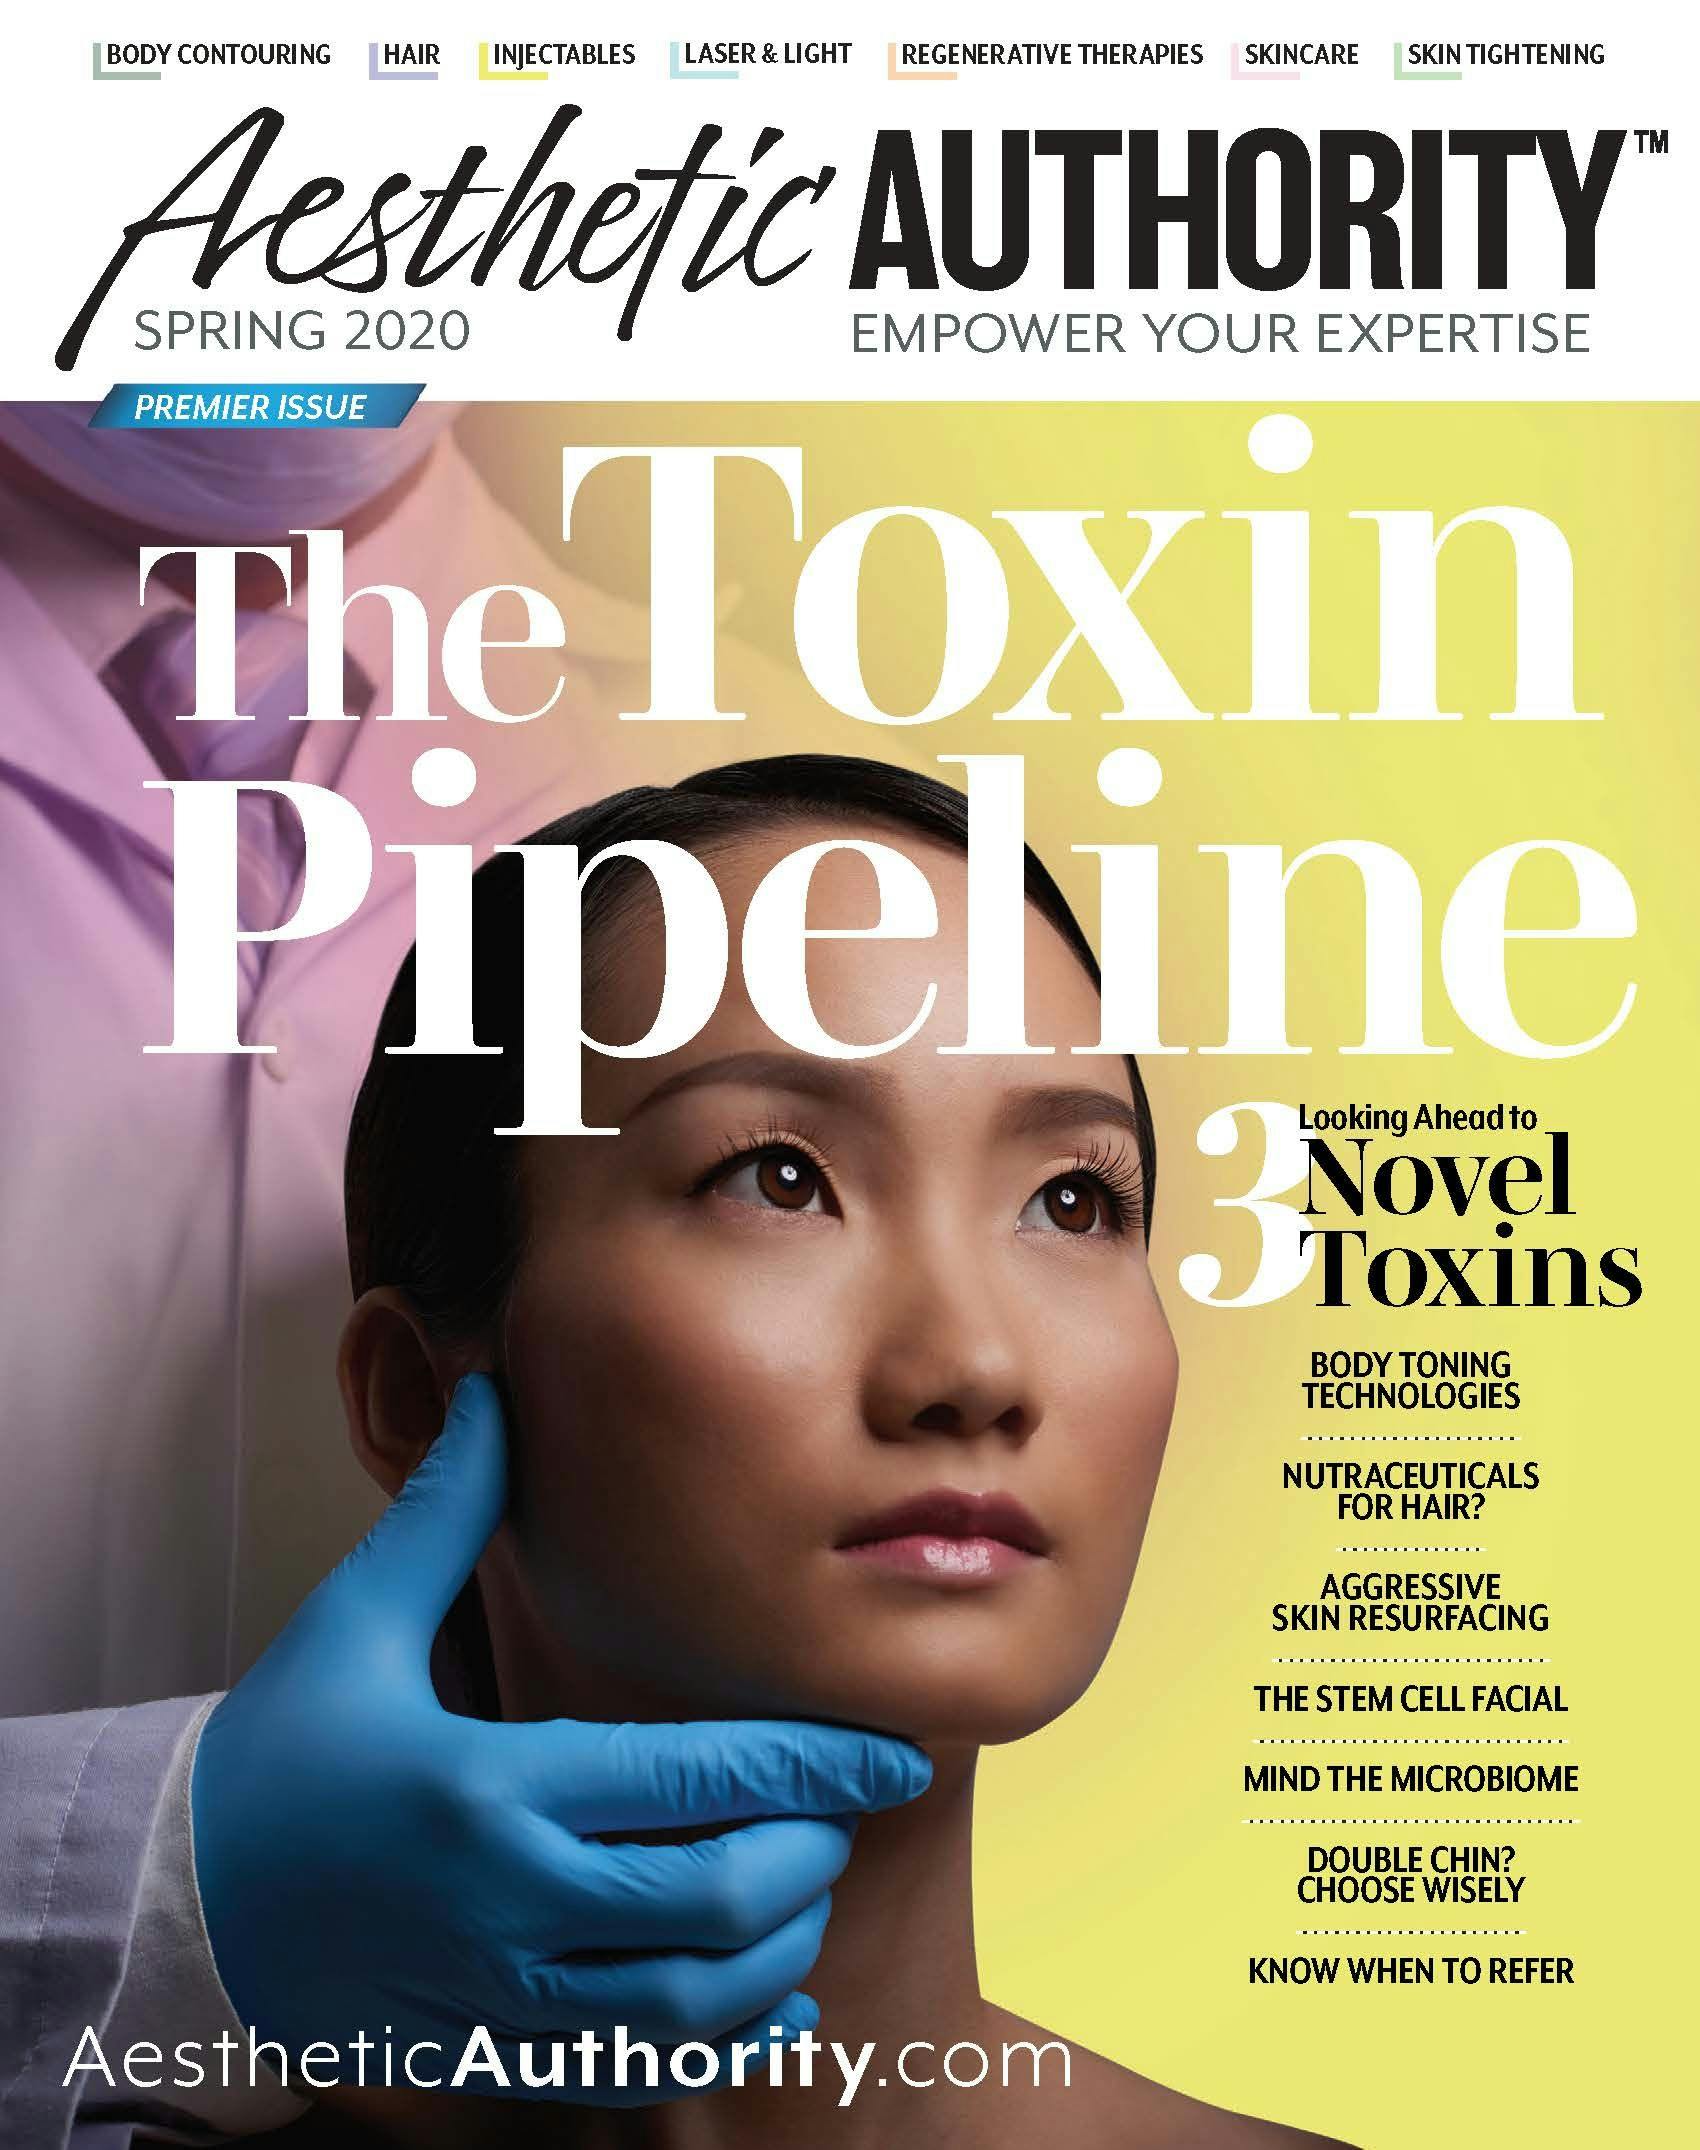 The Toxin Pipeline: Aesthetic Authority Vol.1: No.1